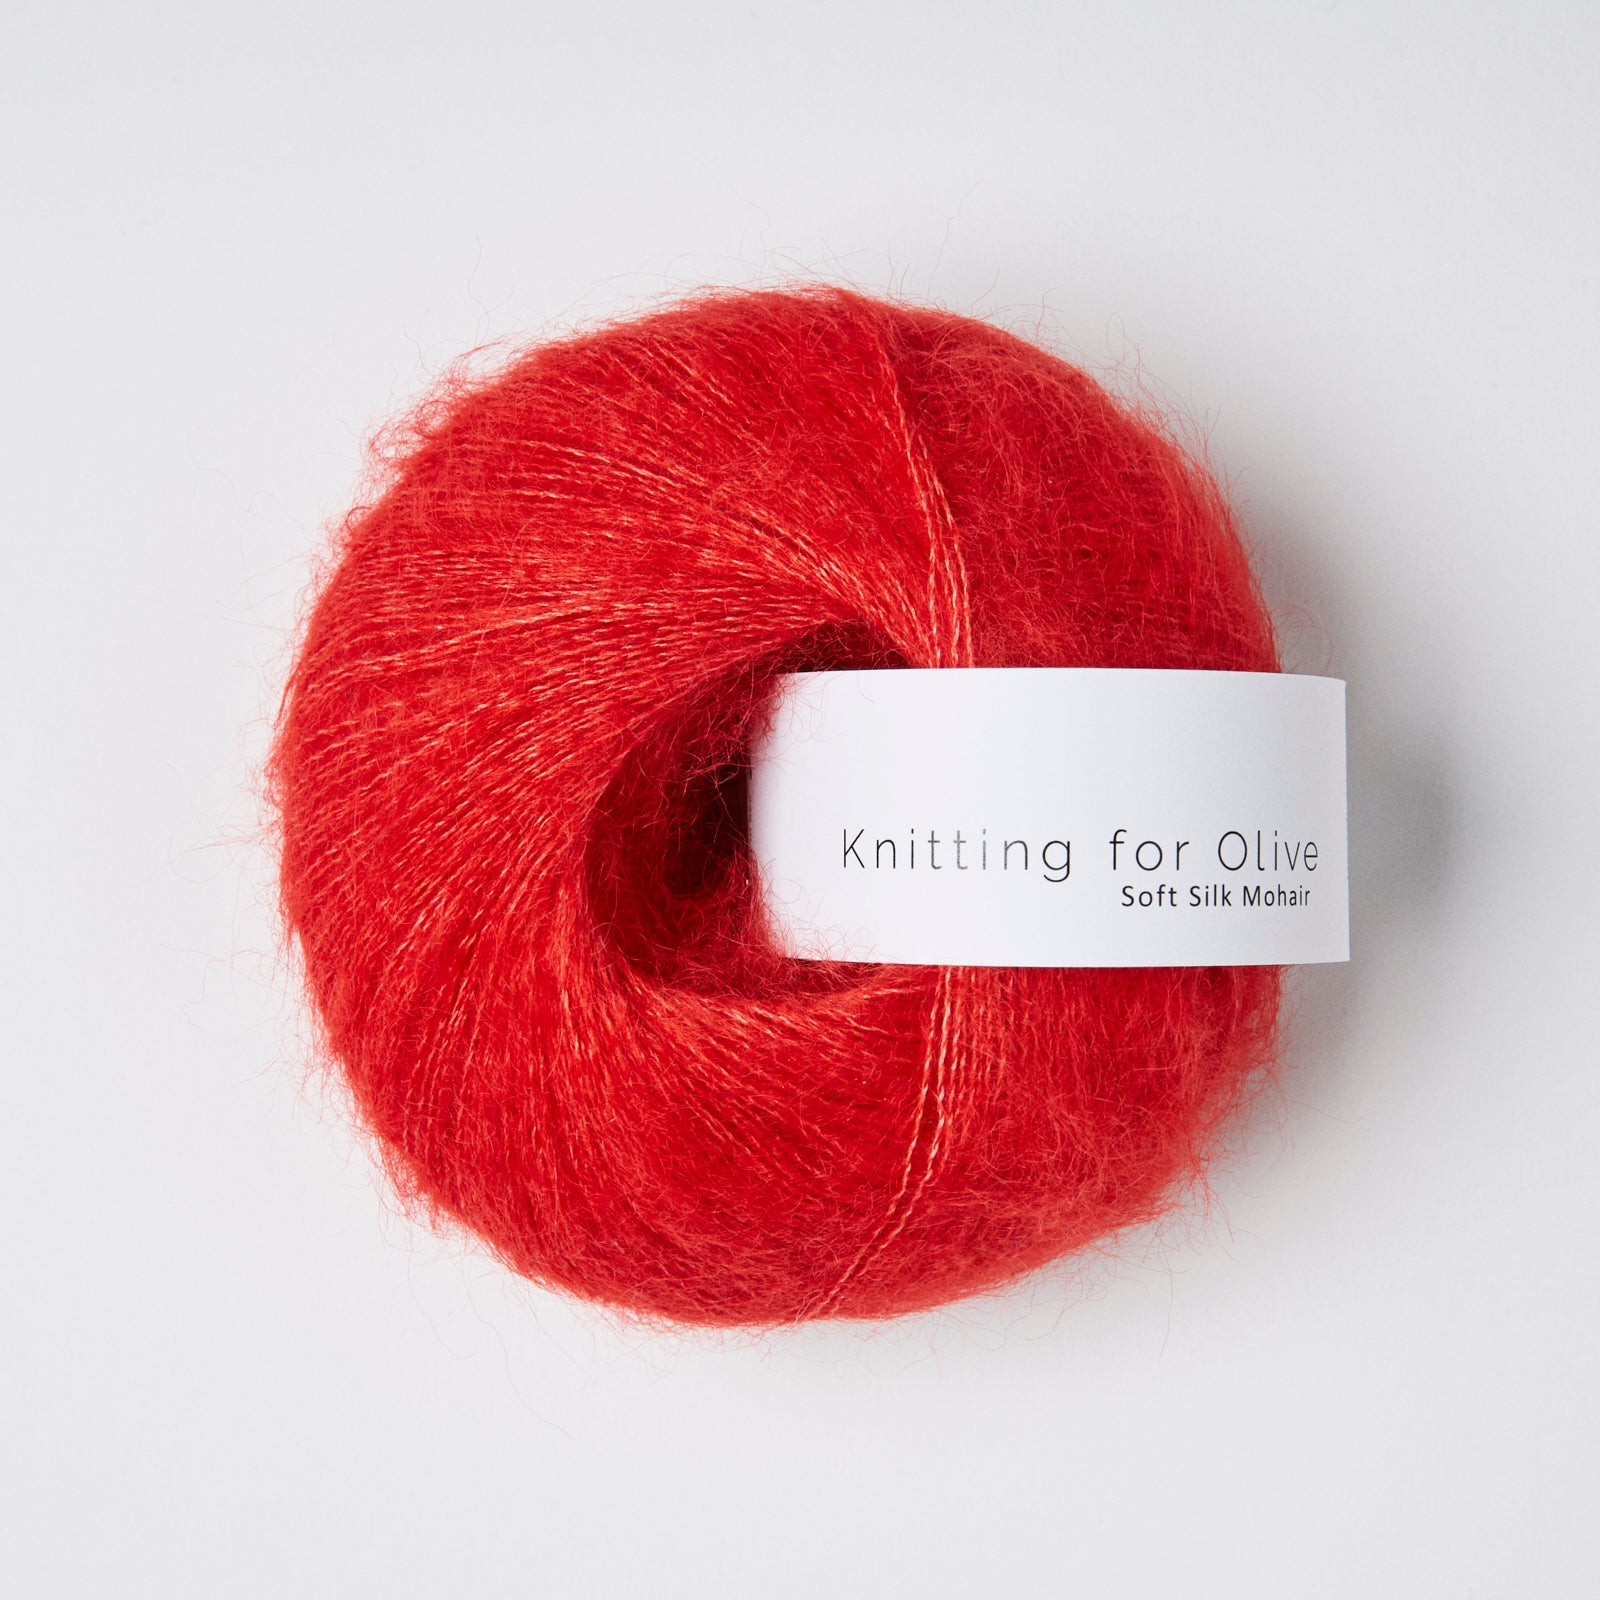 Knitting for Olive Soft Silk Mohair - Red Currant